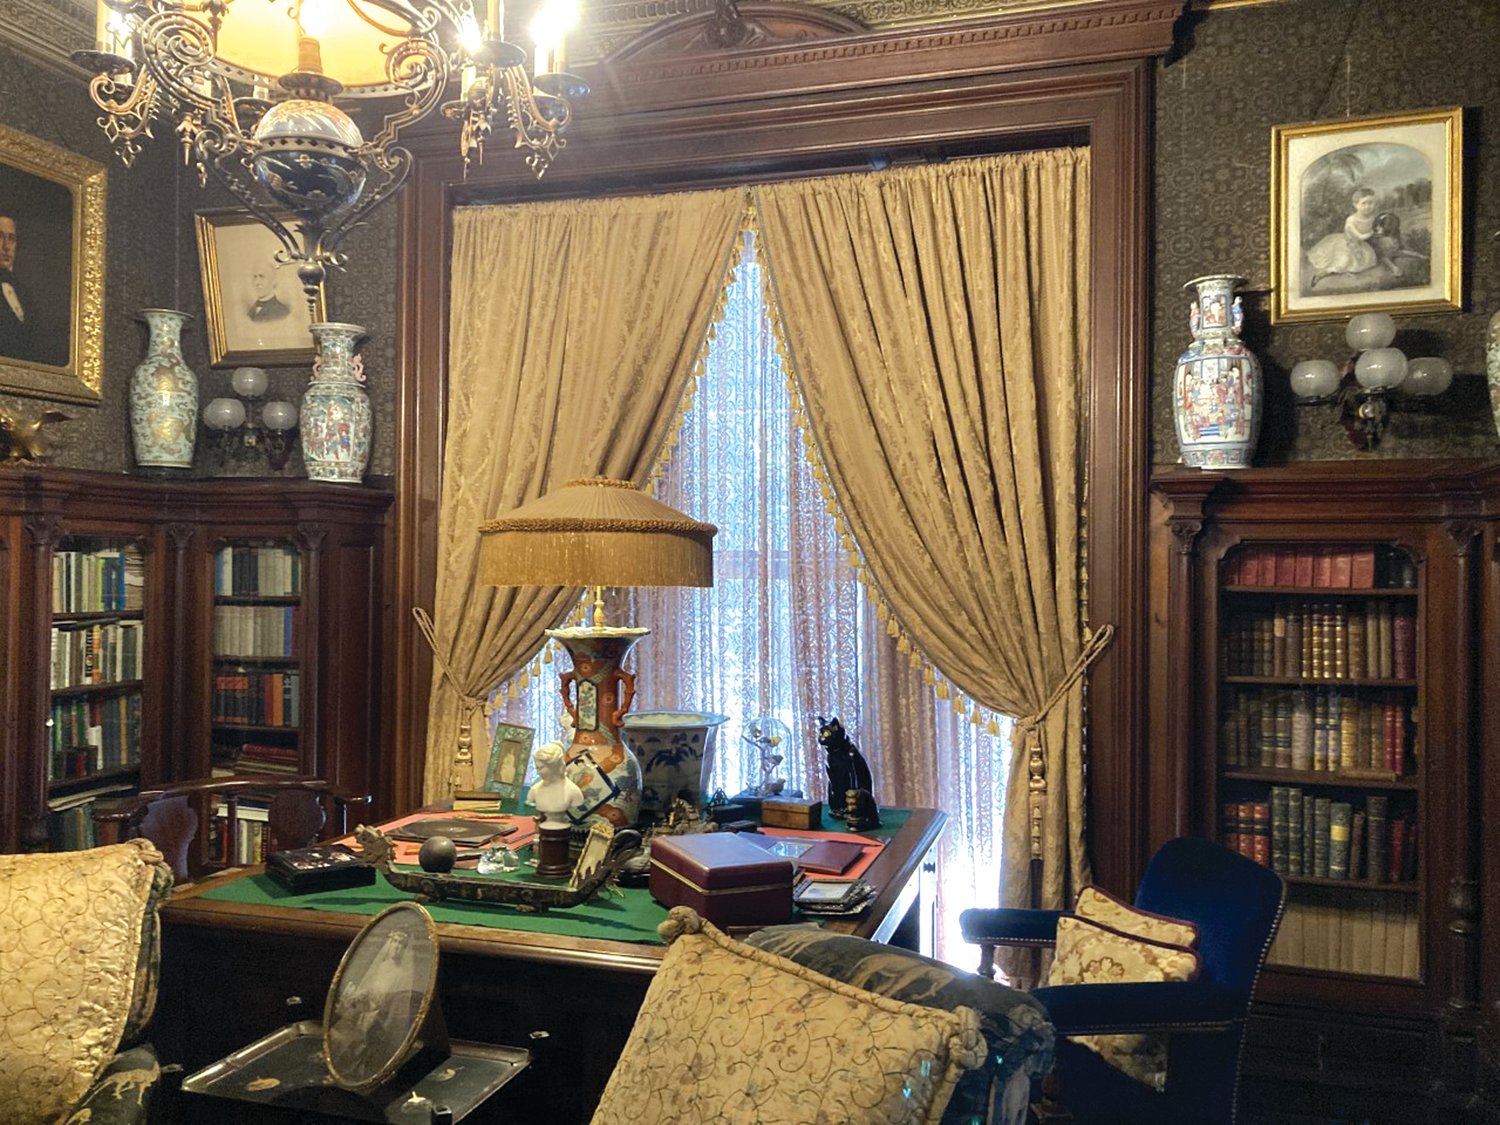 A LOOK INTO THE LIBRARY: For the filming, the library’s desk was removed from the set. The curtains in the background are new replacements provided by the crew.